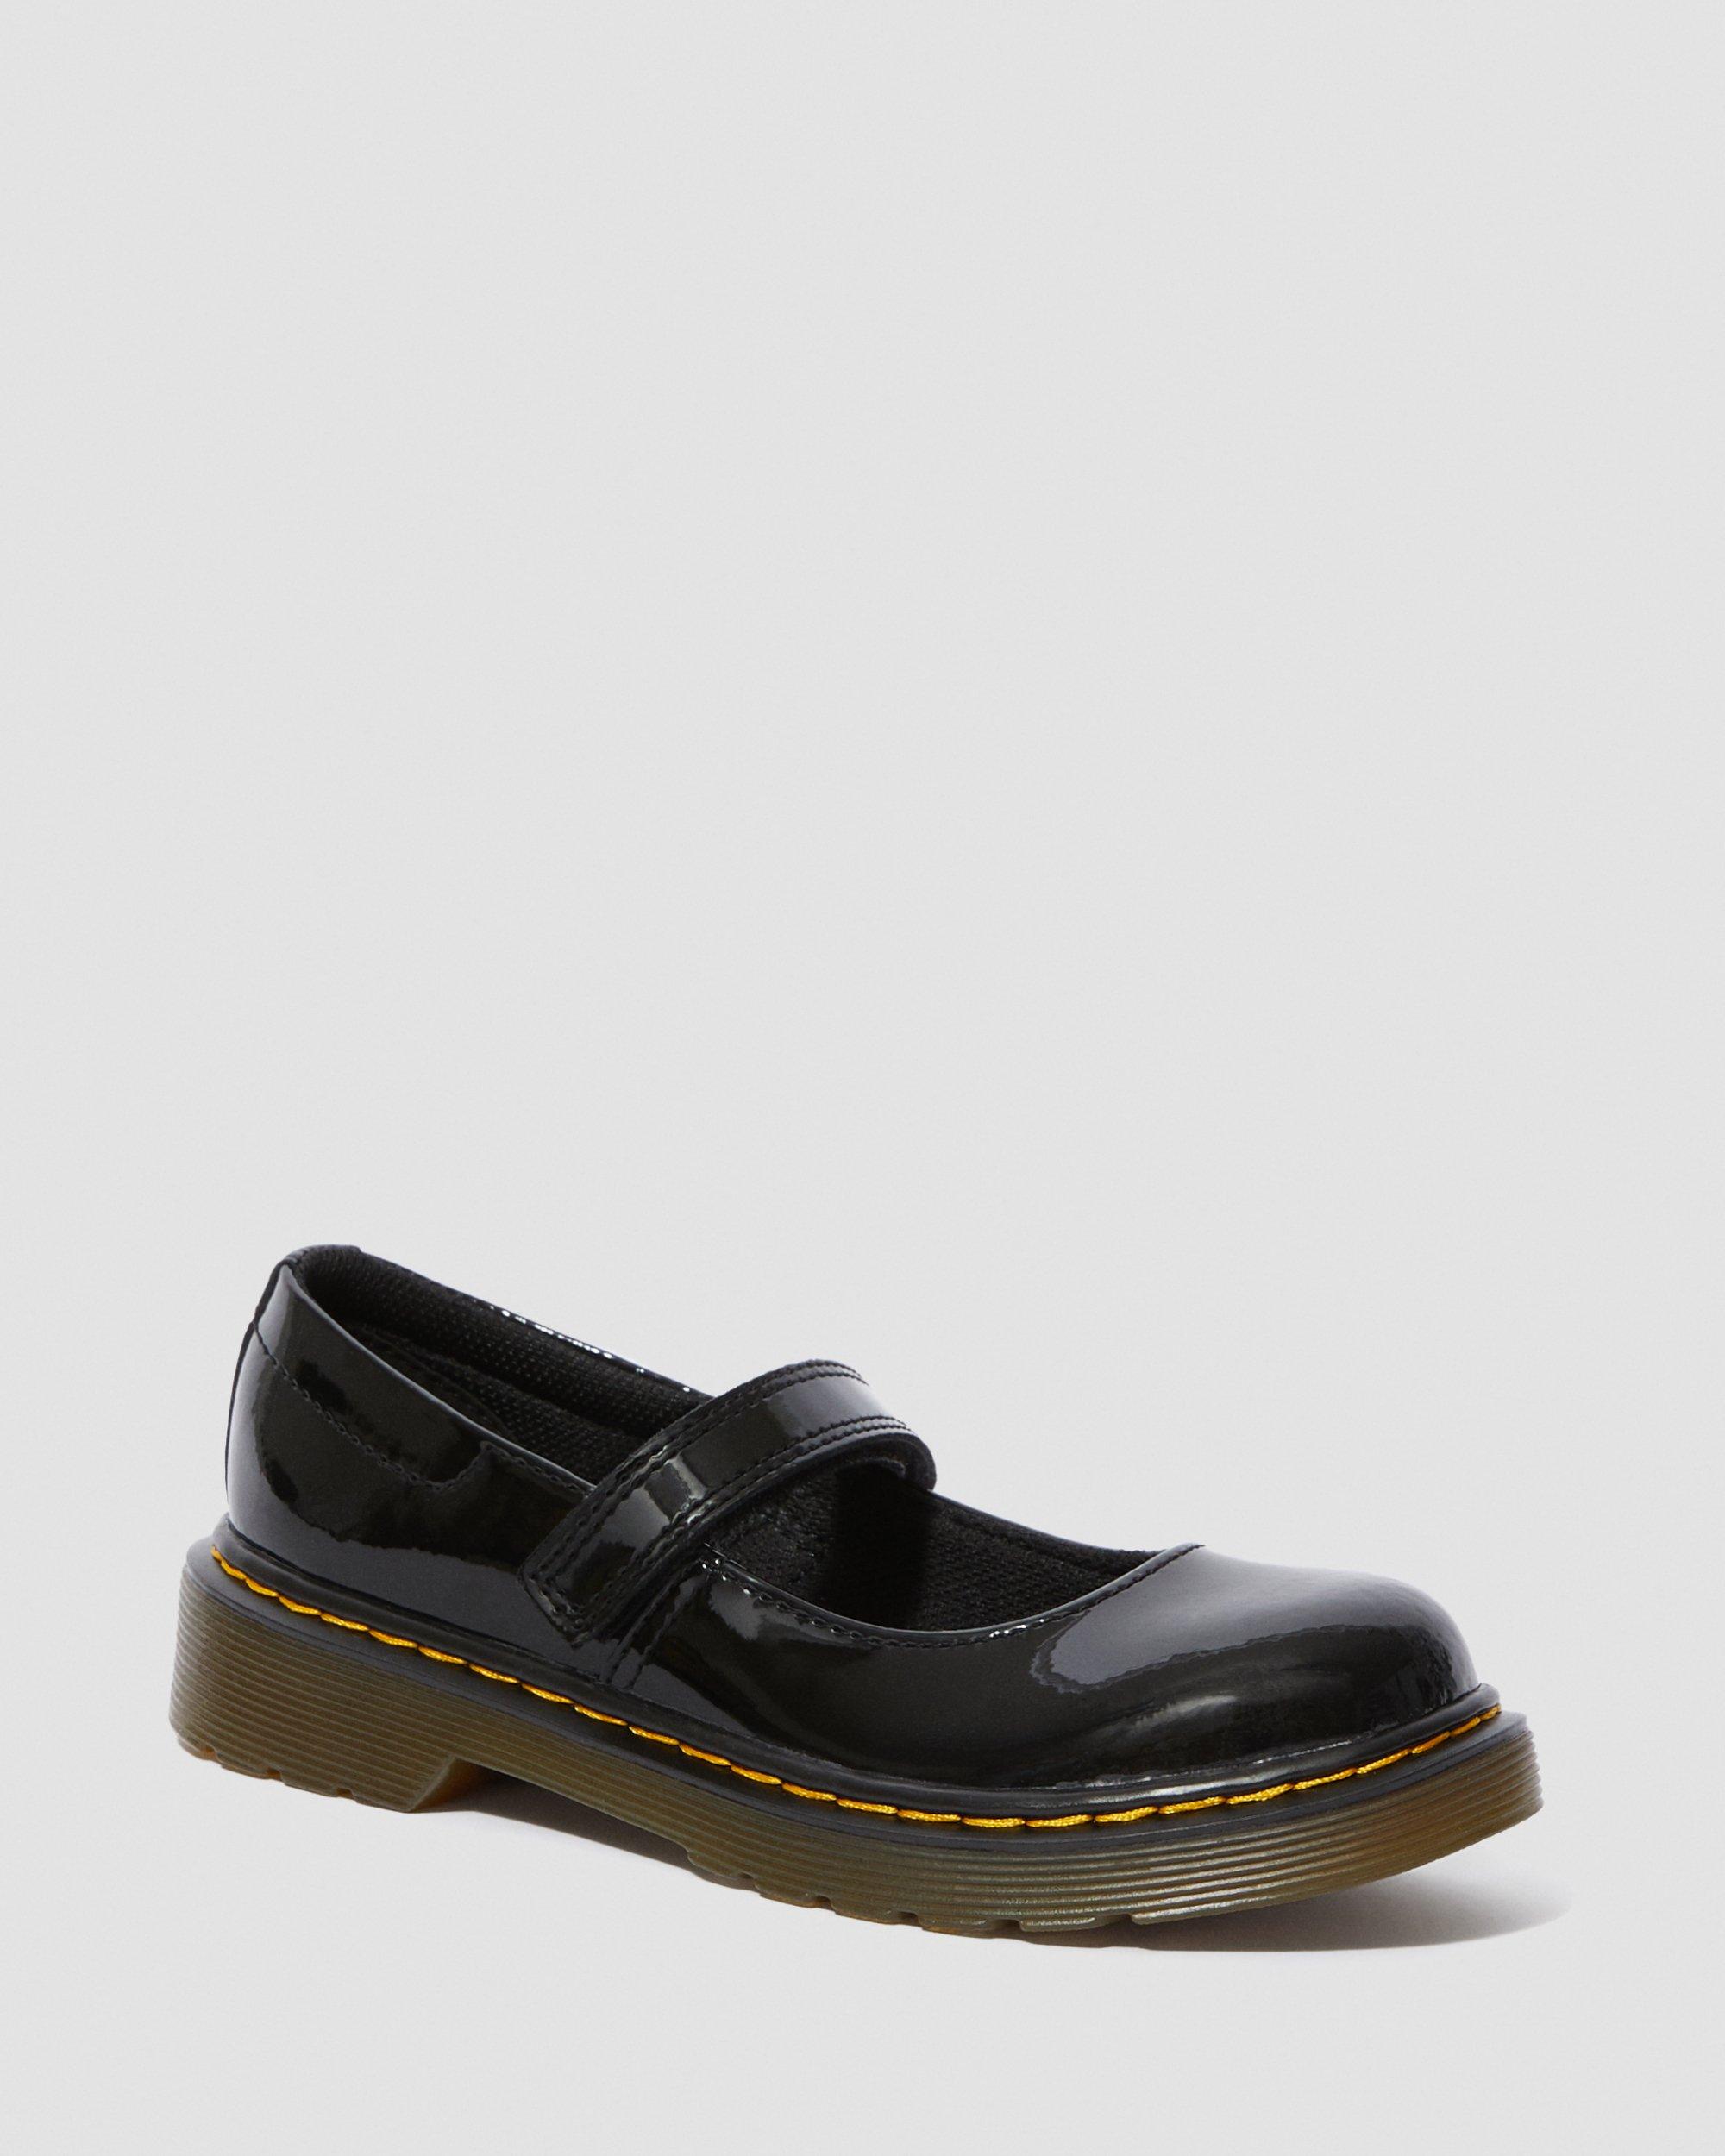 Junior Maccy Patent Leather Mary Jane Shoes in Black | Dr. Martens